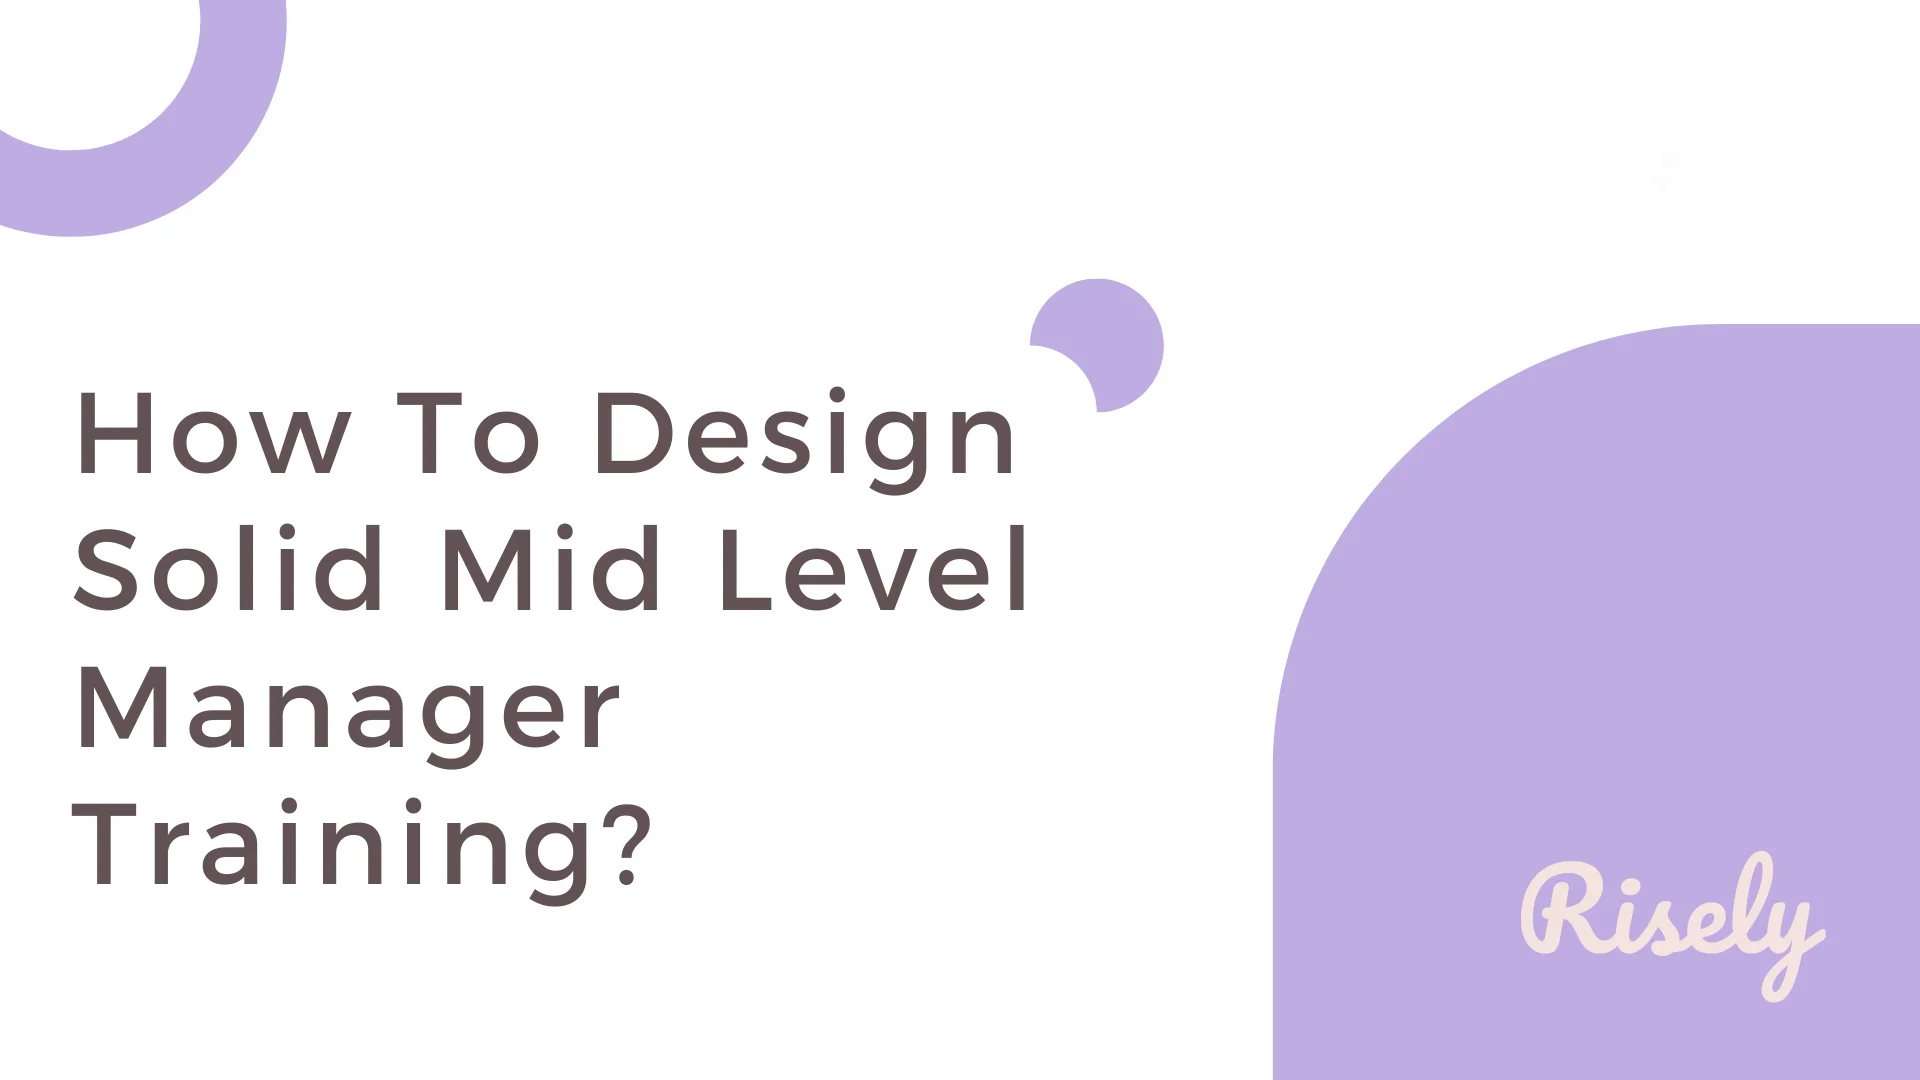 How To Design Solid Mid Level Manager Training?